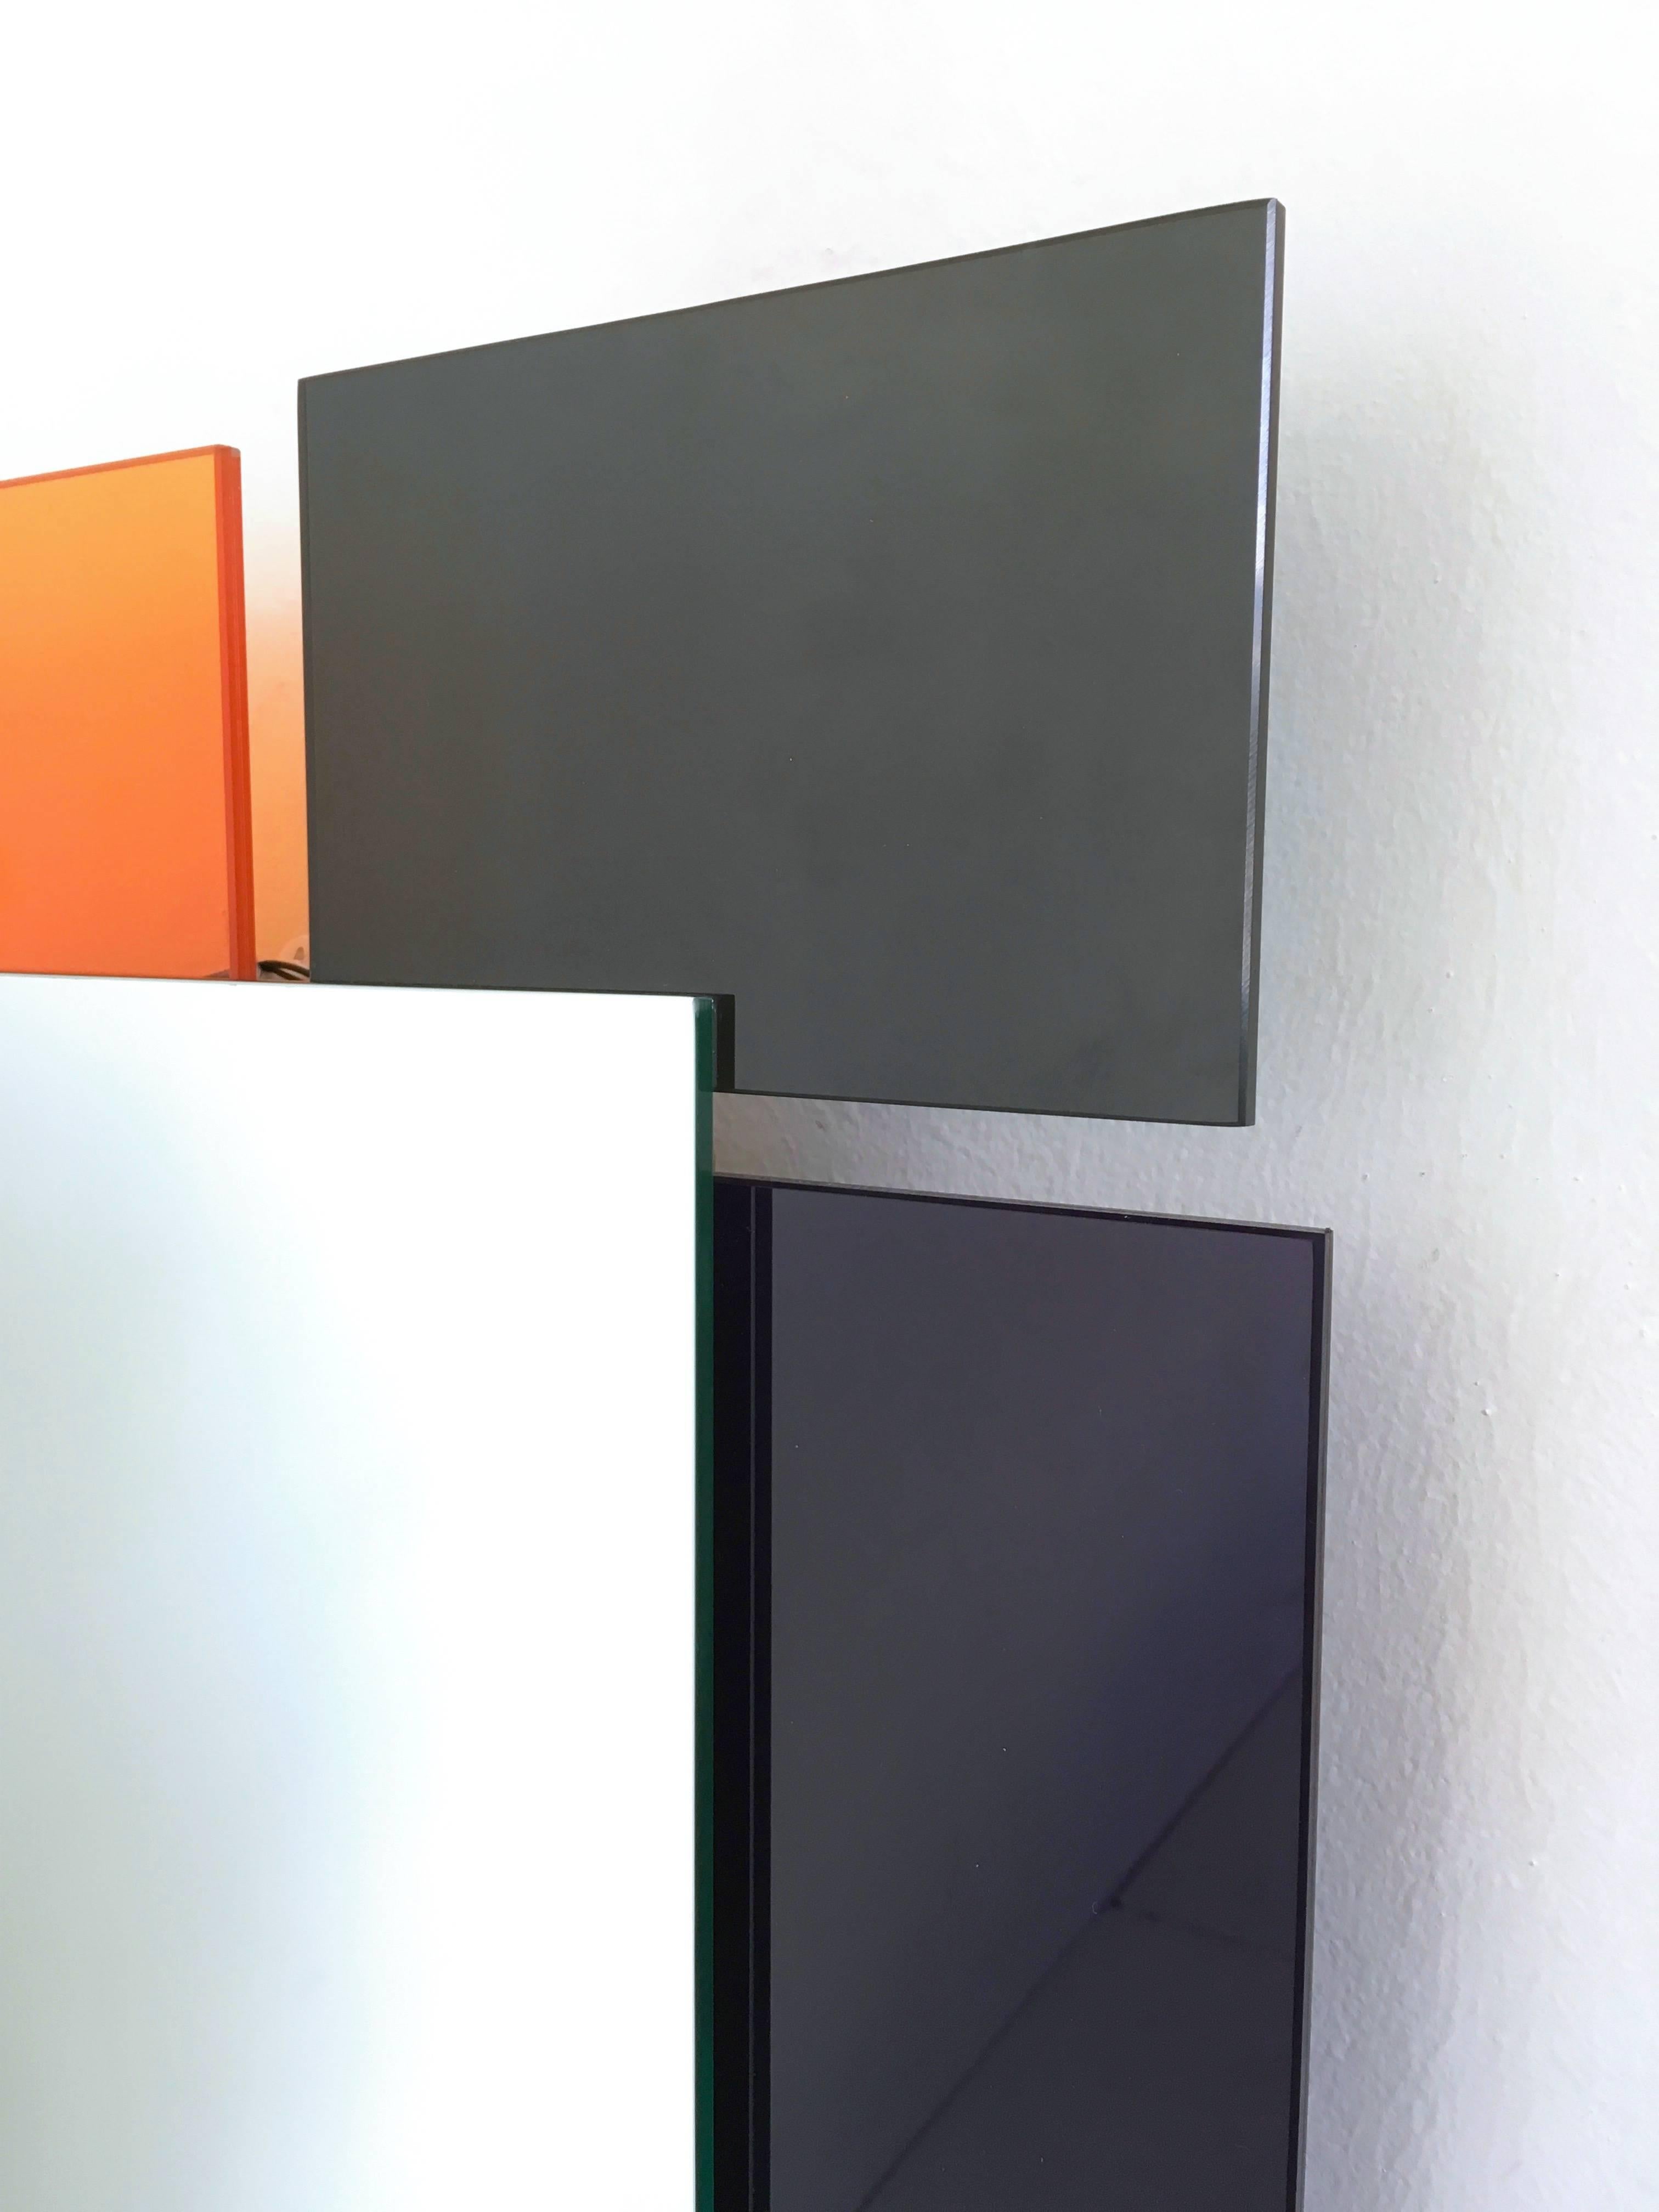 Pair of Postmodern Black and Orange Wall Mirrors in the Style of Sottsass, 1980s For Sale 4